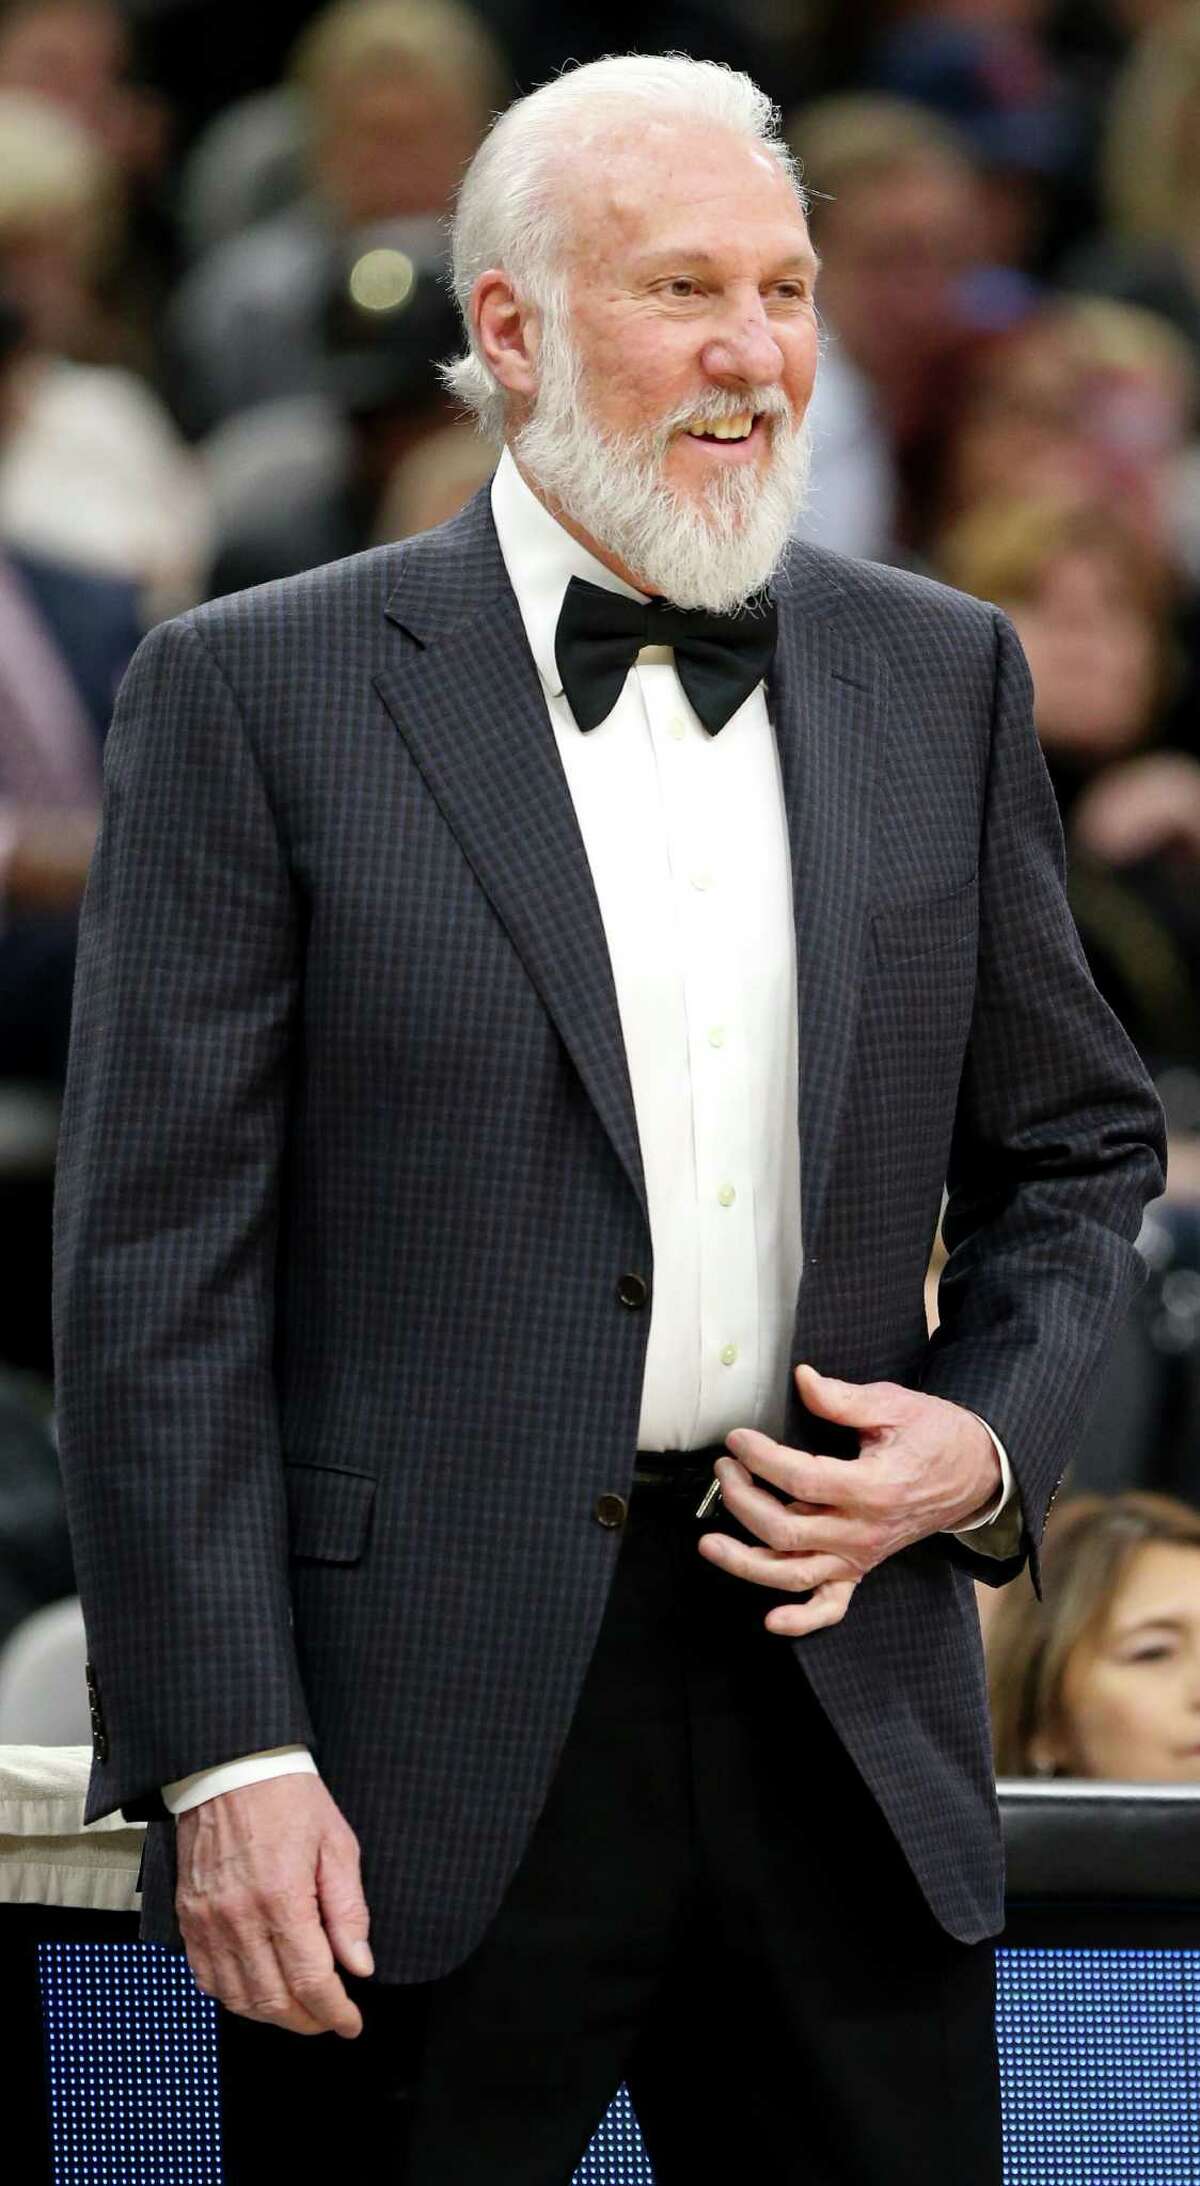 Spurs coach Gregg Popovich watches first half action against the Dallas Mavericks on Jan. 29, 2017 at the AT&T Center.